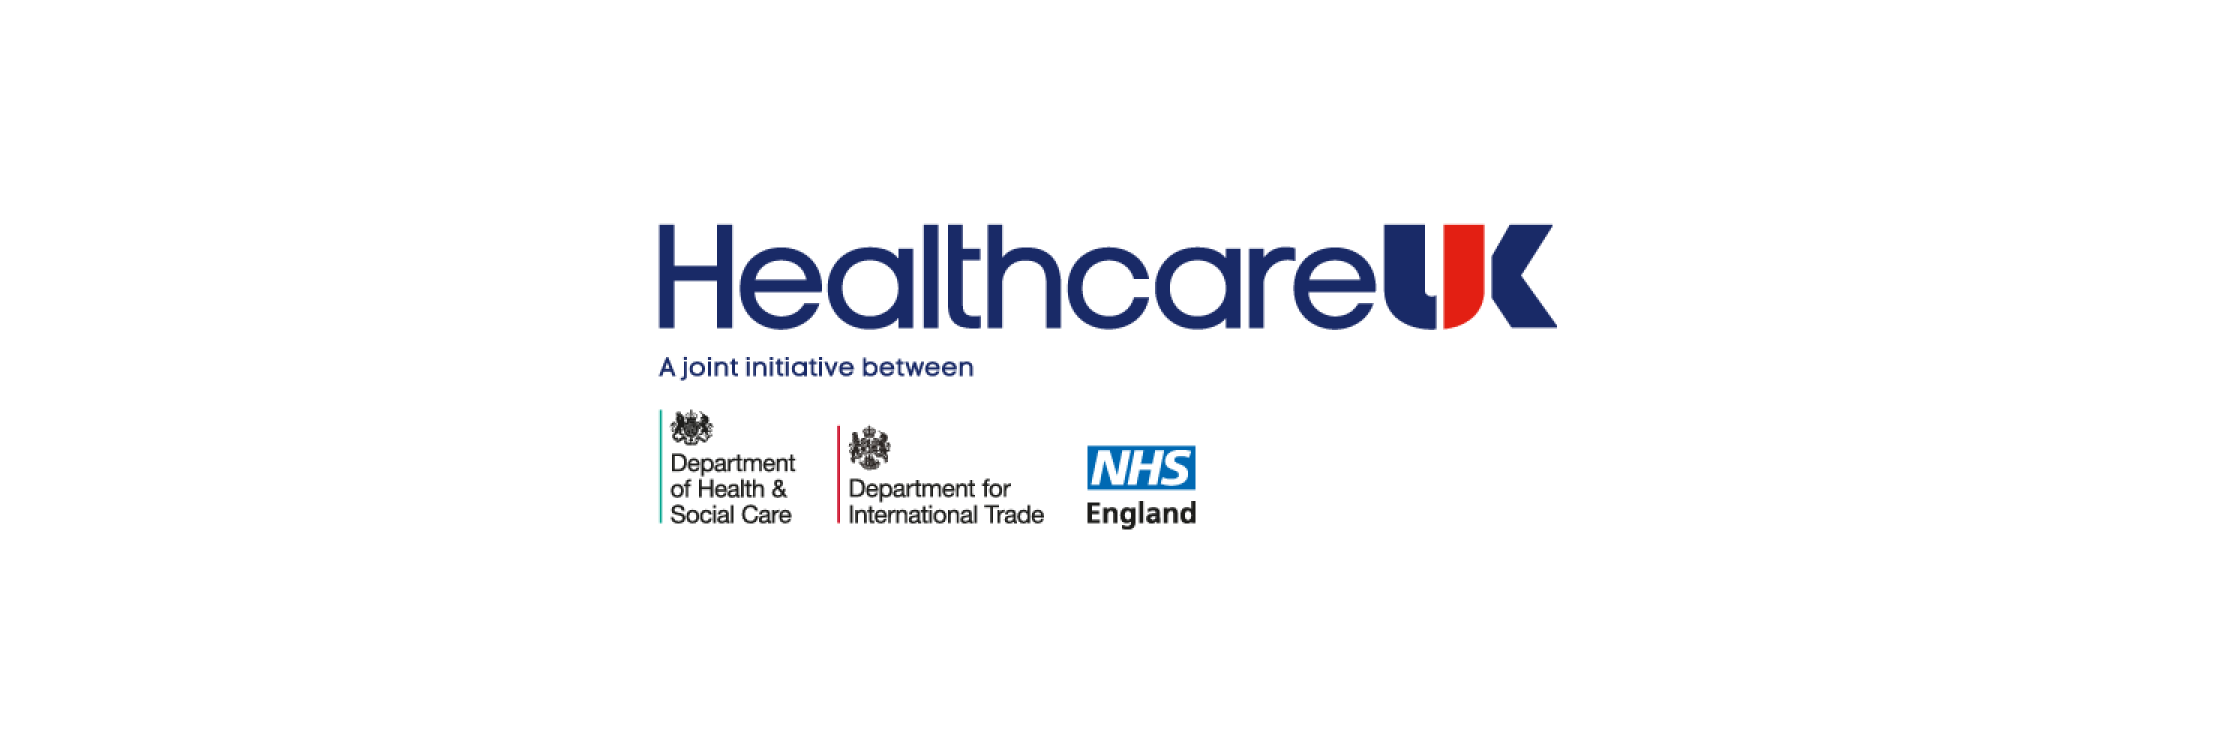 Healthcare uk logo, department of health and social care logo, department of international trade logo and NHS england logo